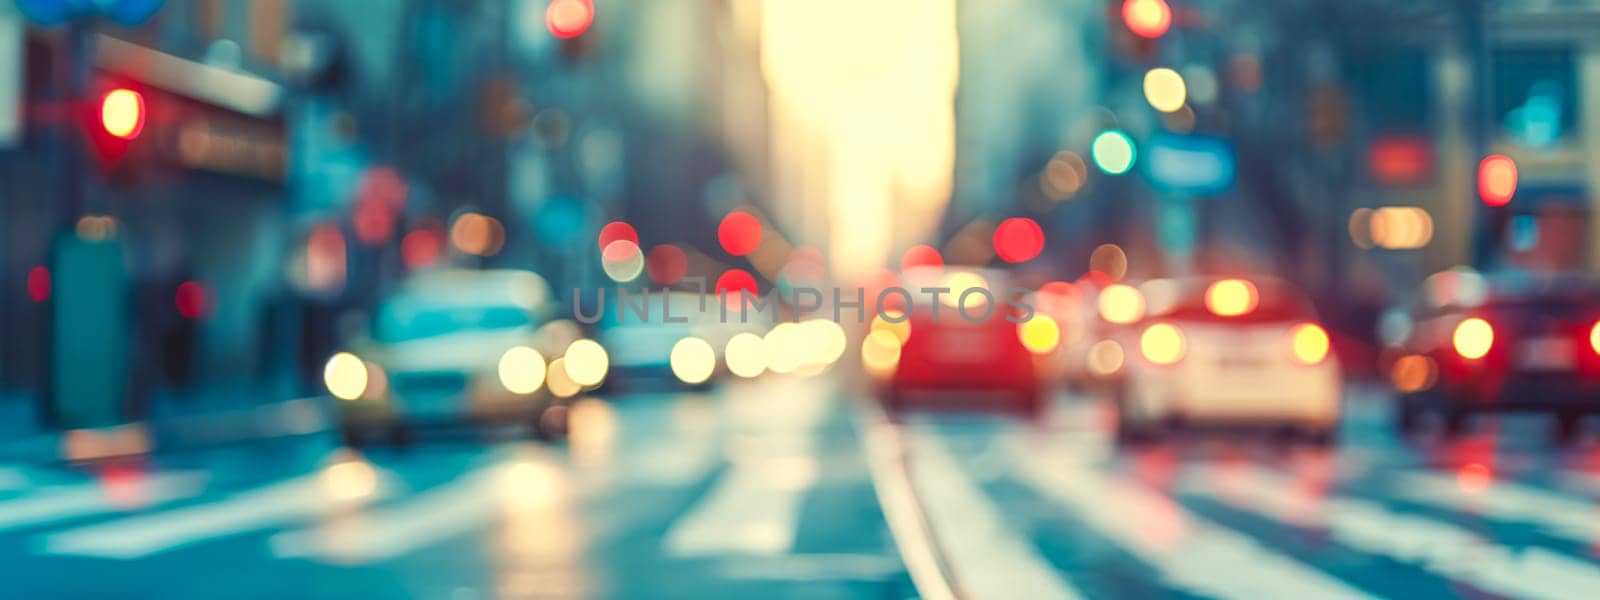 blurred city street scene with bokeh lights from traffic signals and cars, creating an urban atmosphere. by Edophoto